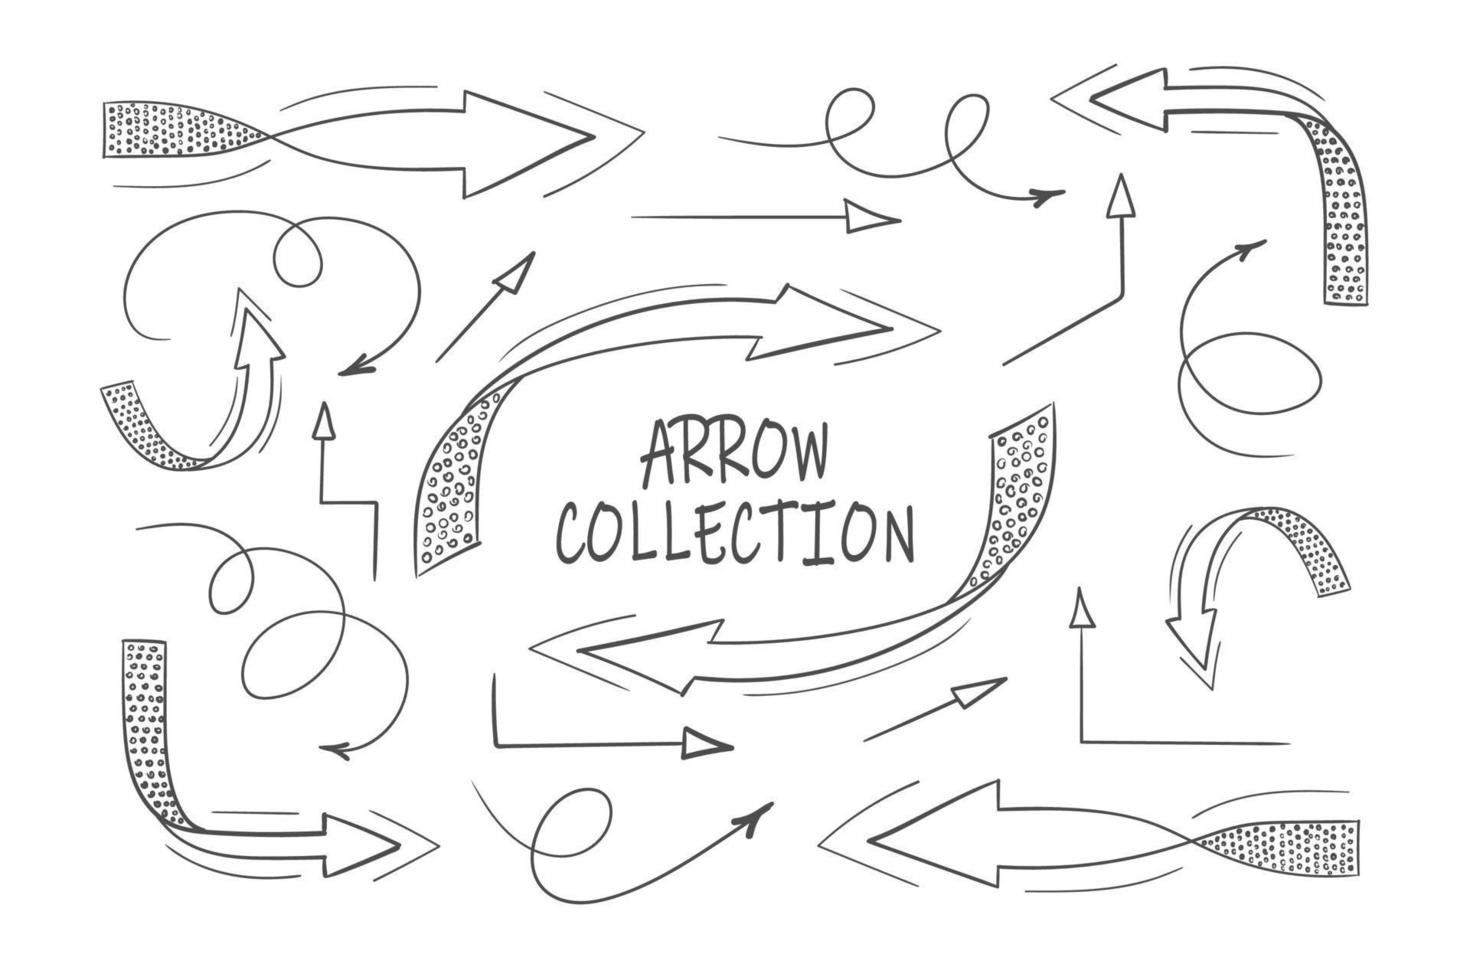 Arrows sketch set. Set of black grunge hand drawn arrows isolated on white. Vector illustration